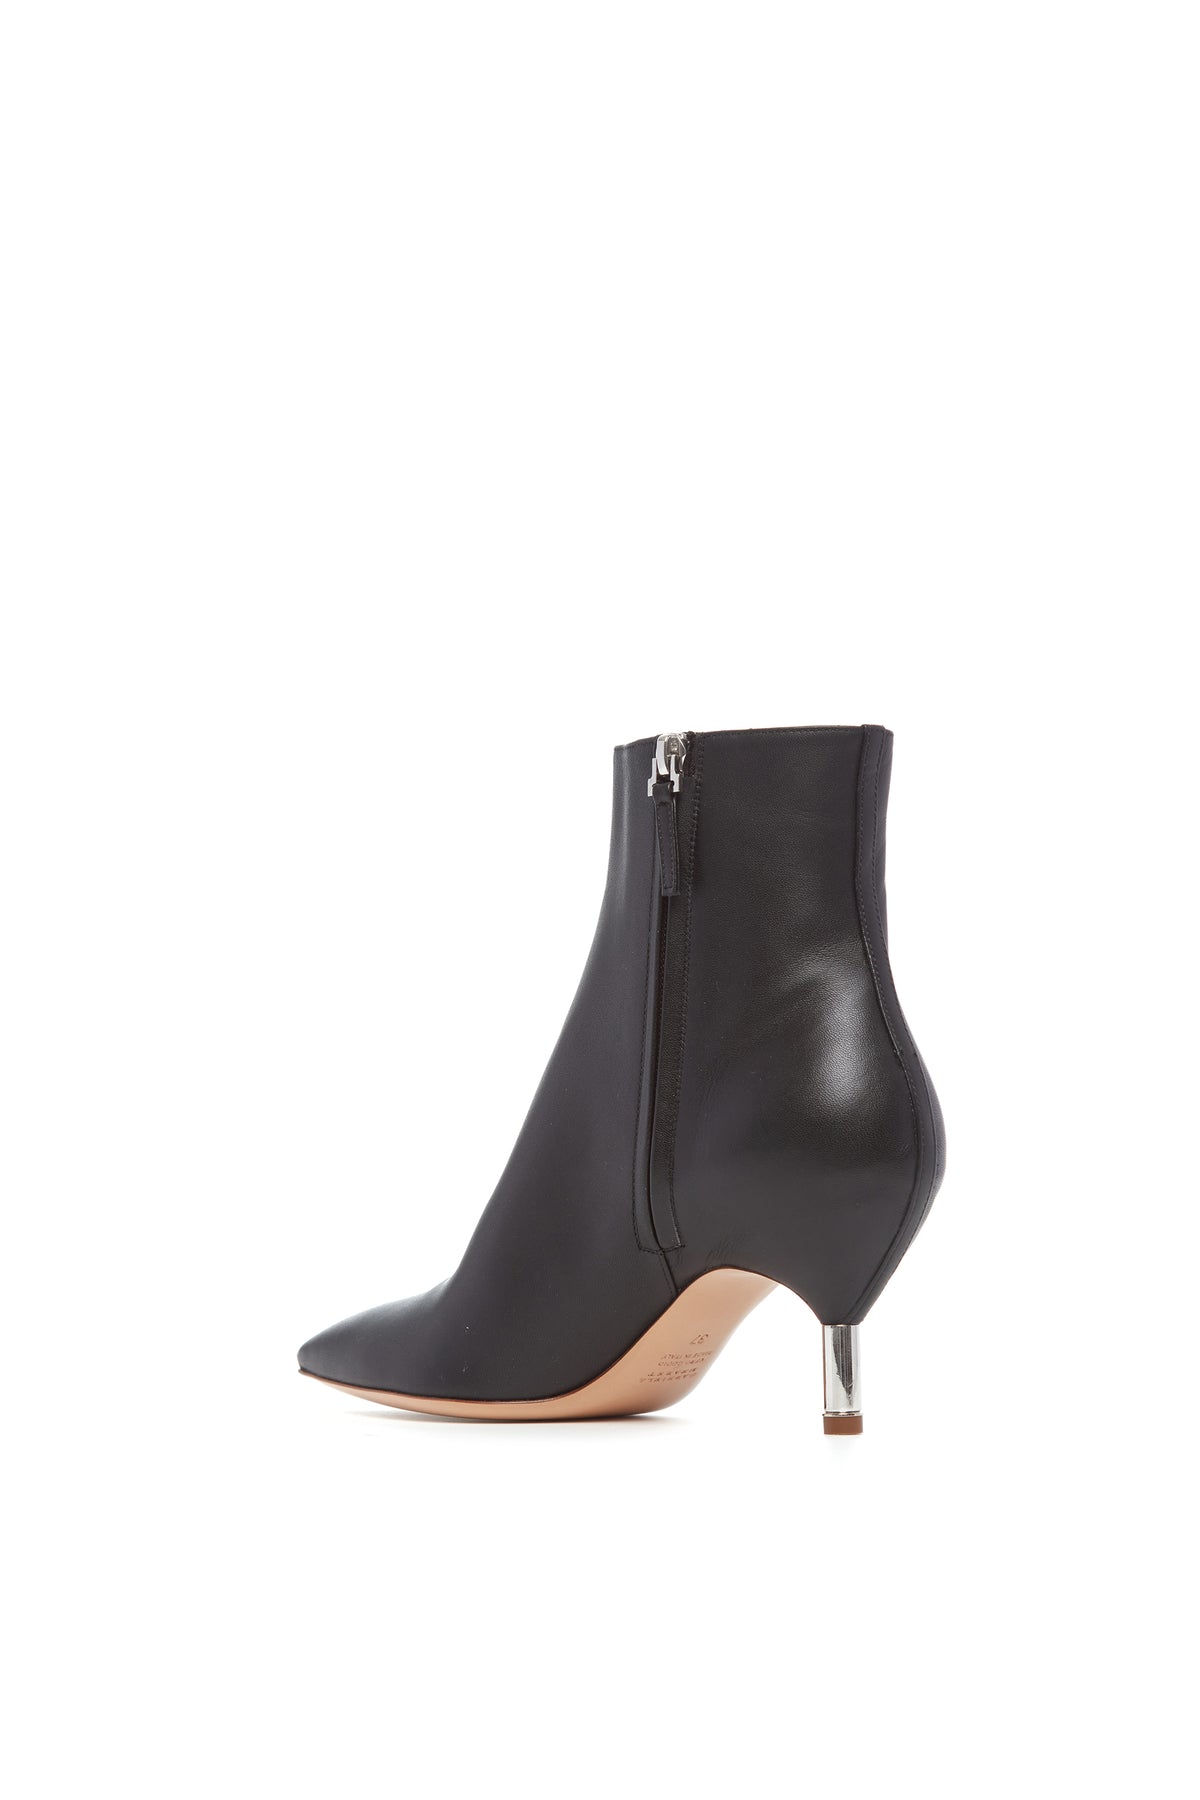 Valeria Heeled Boot in Black Leather